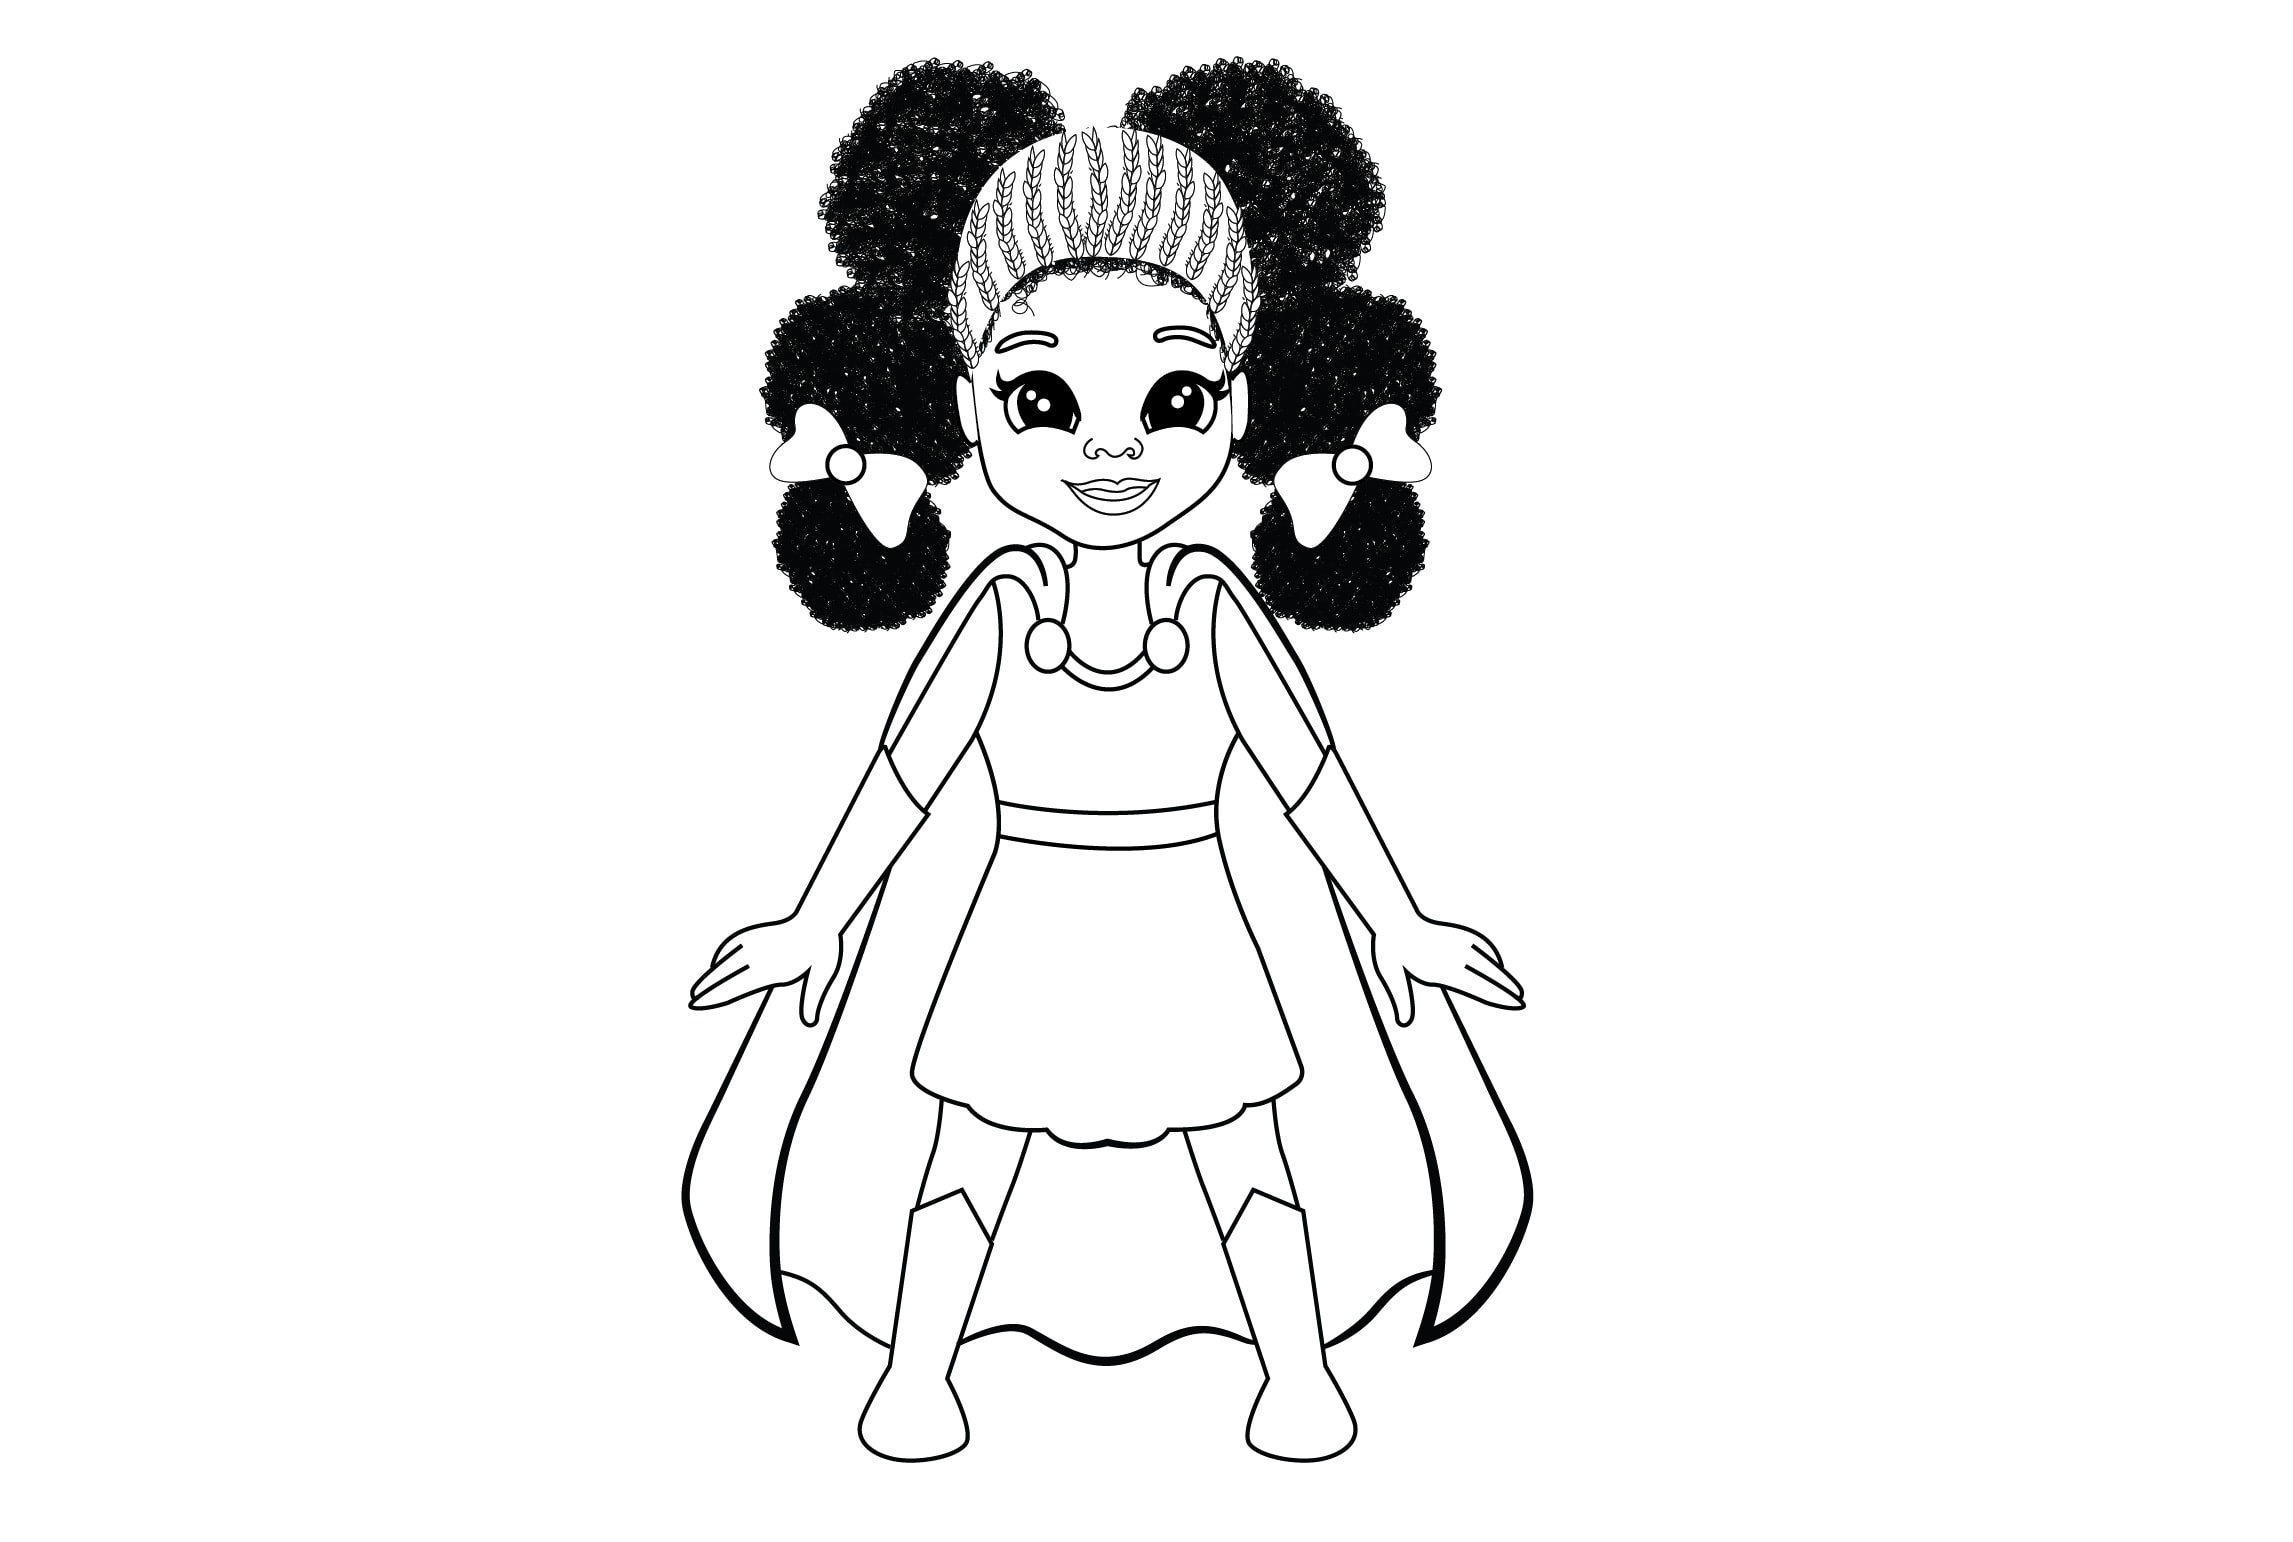 Coloring Book Page of Cute African American Girl · Creative Fabrica